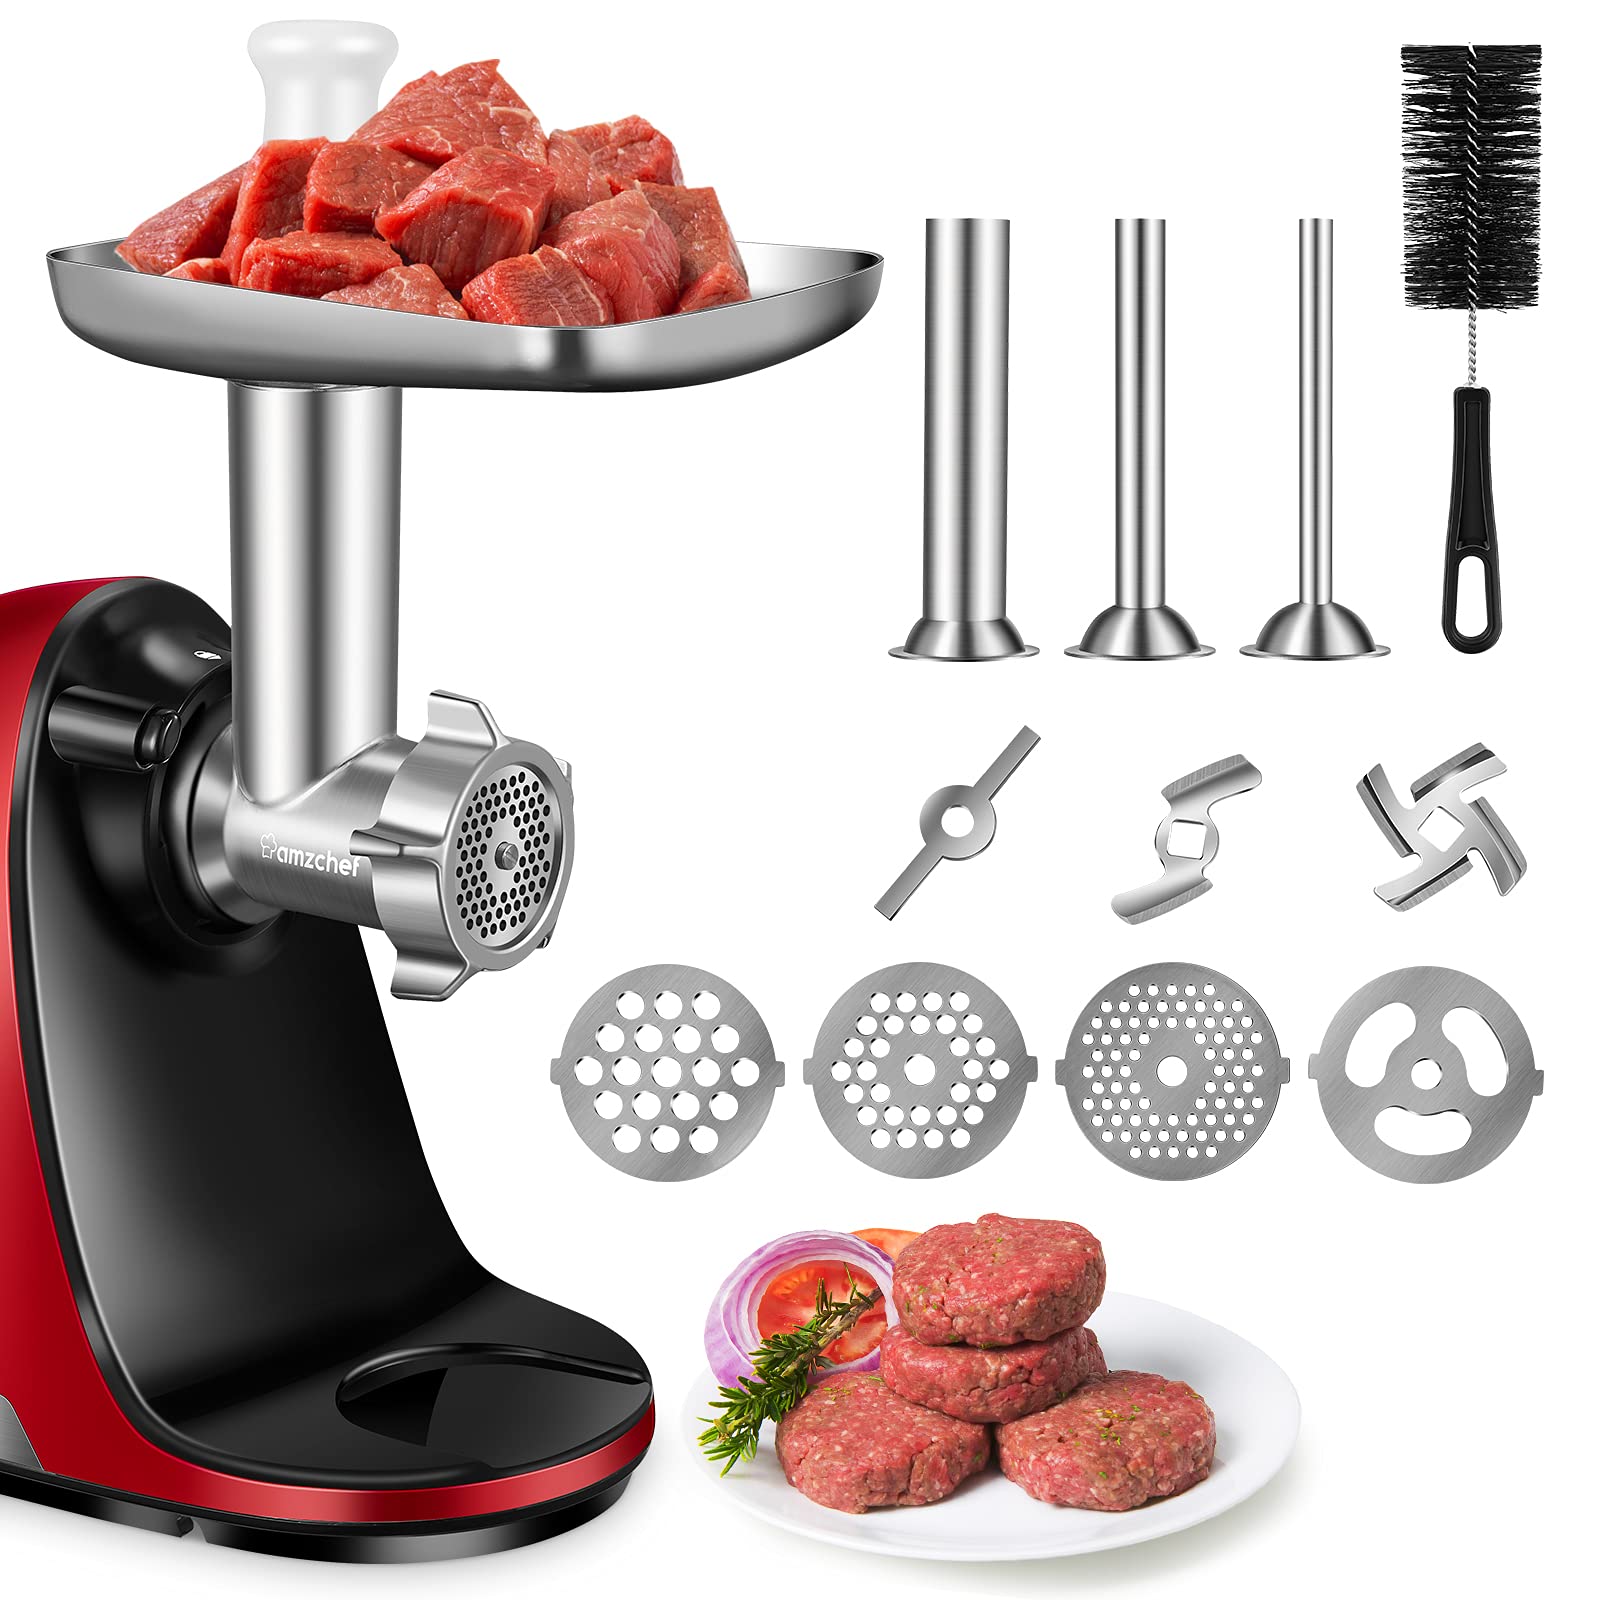 AMZCHEF Slow Juicer Food Slicers Cheese Grater Attachment